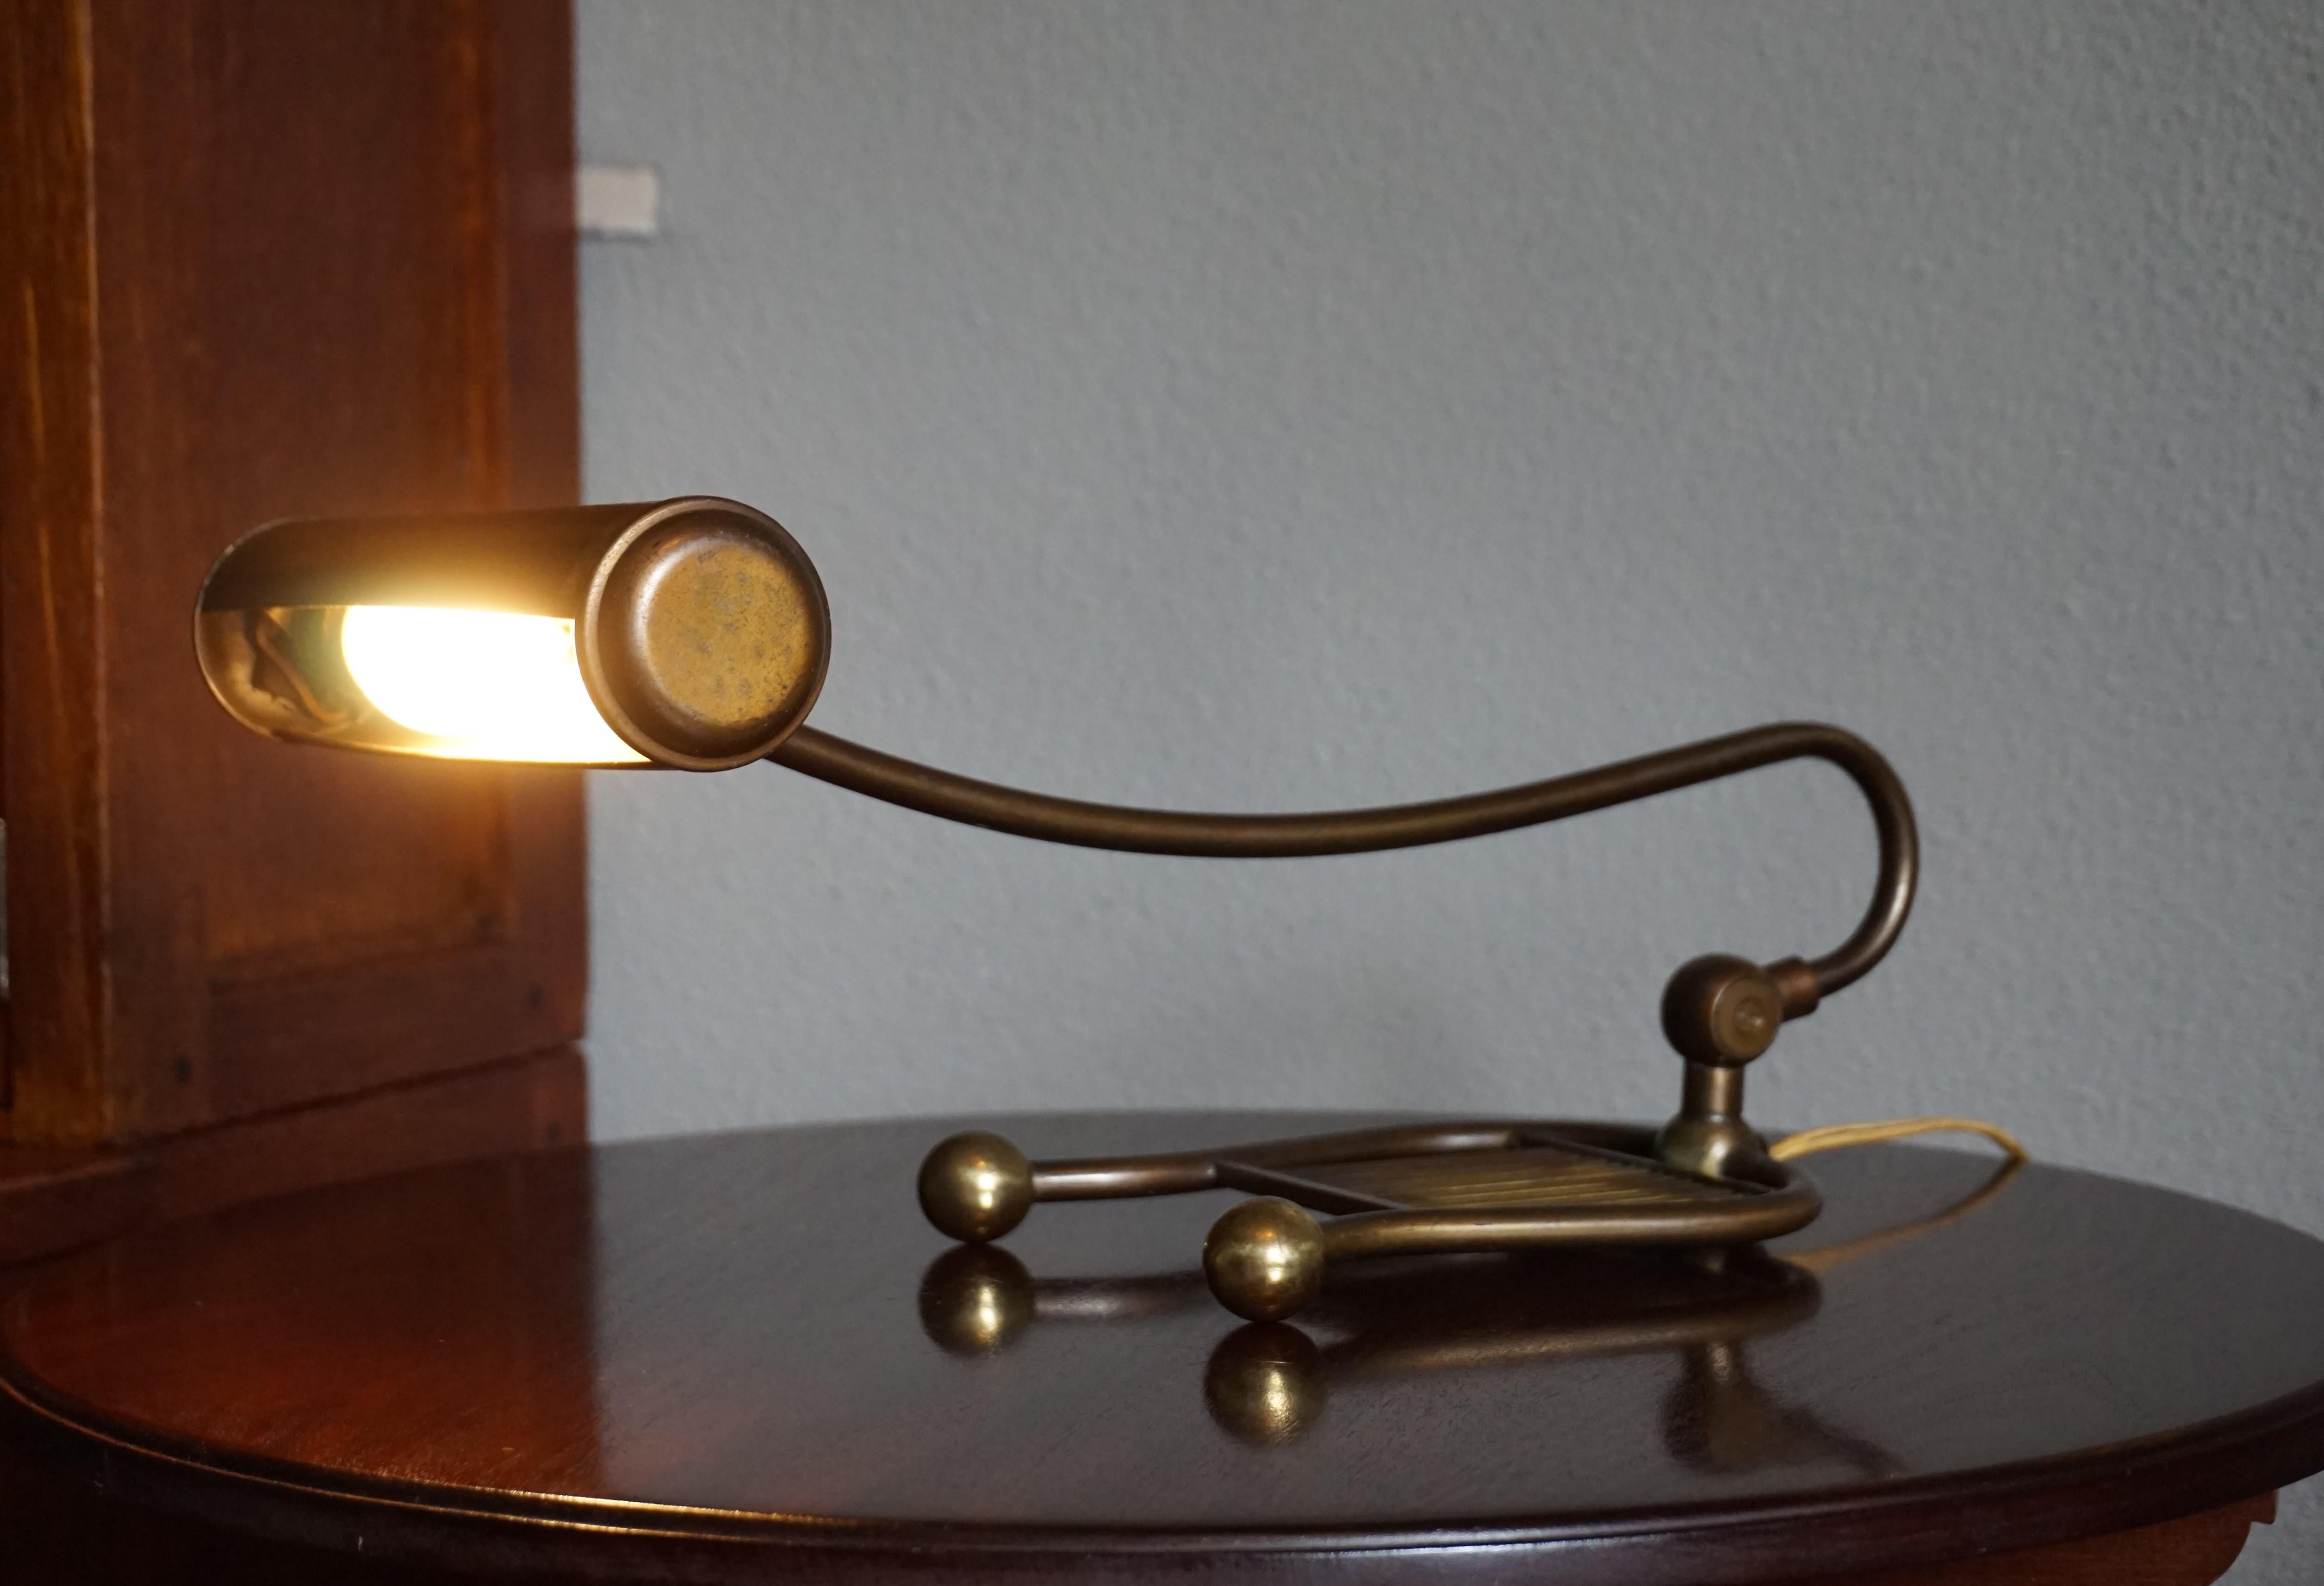 Stylish & Elegant Early to Mid-20th Century Harp Shaped Brass Piano or Desk Lamp 3